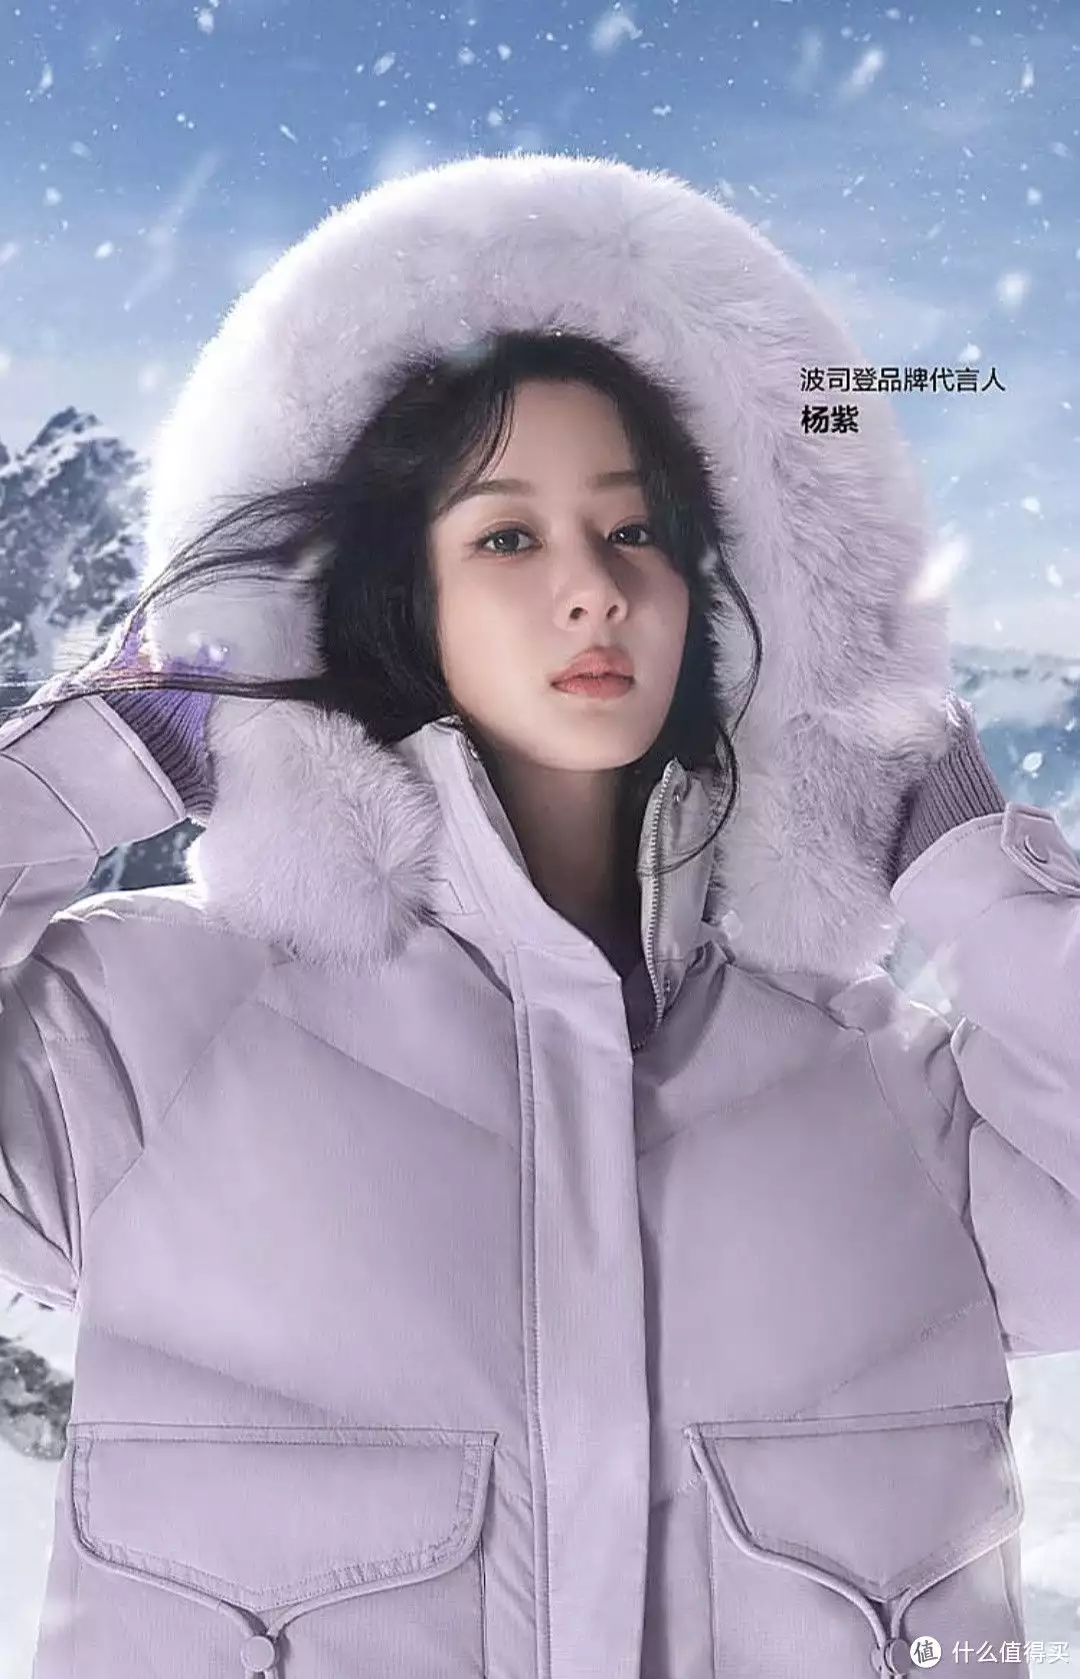 Boshide down jacket women's fashion thickened mid -length jacket, light and warm, let you shuttle freely in winter!Broadcast article